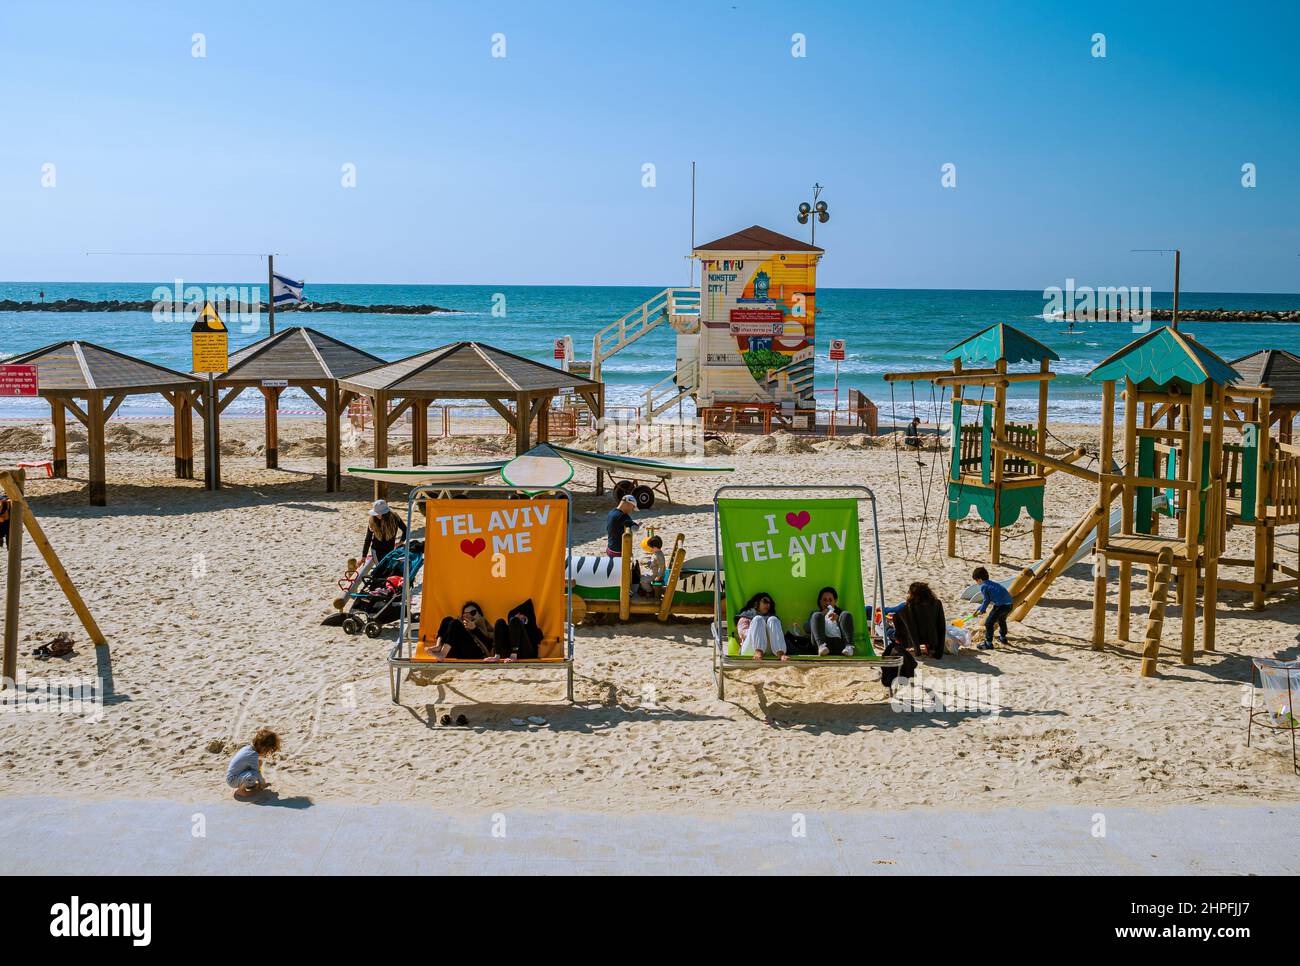 Tel-Aviv, Israel - March 26, 2019: White sand on the beach, seats, and umbrellas on the seaside in the summertime Stock Photo